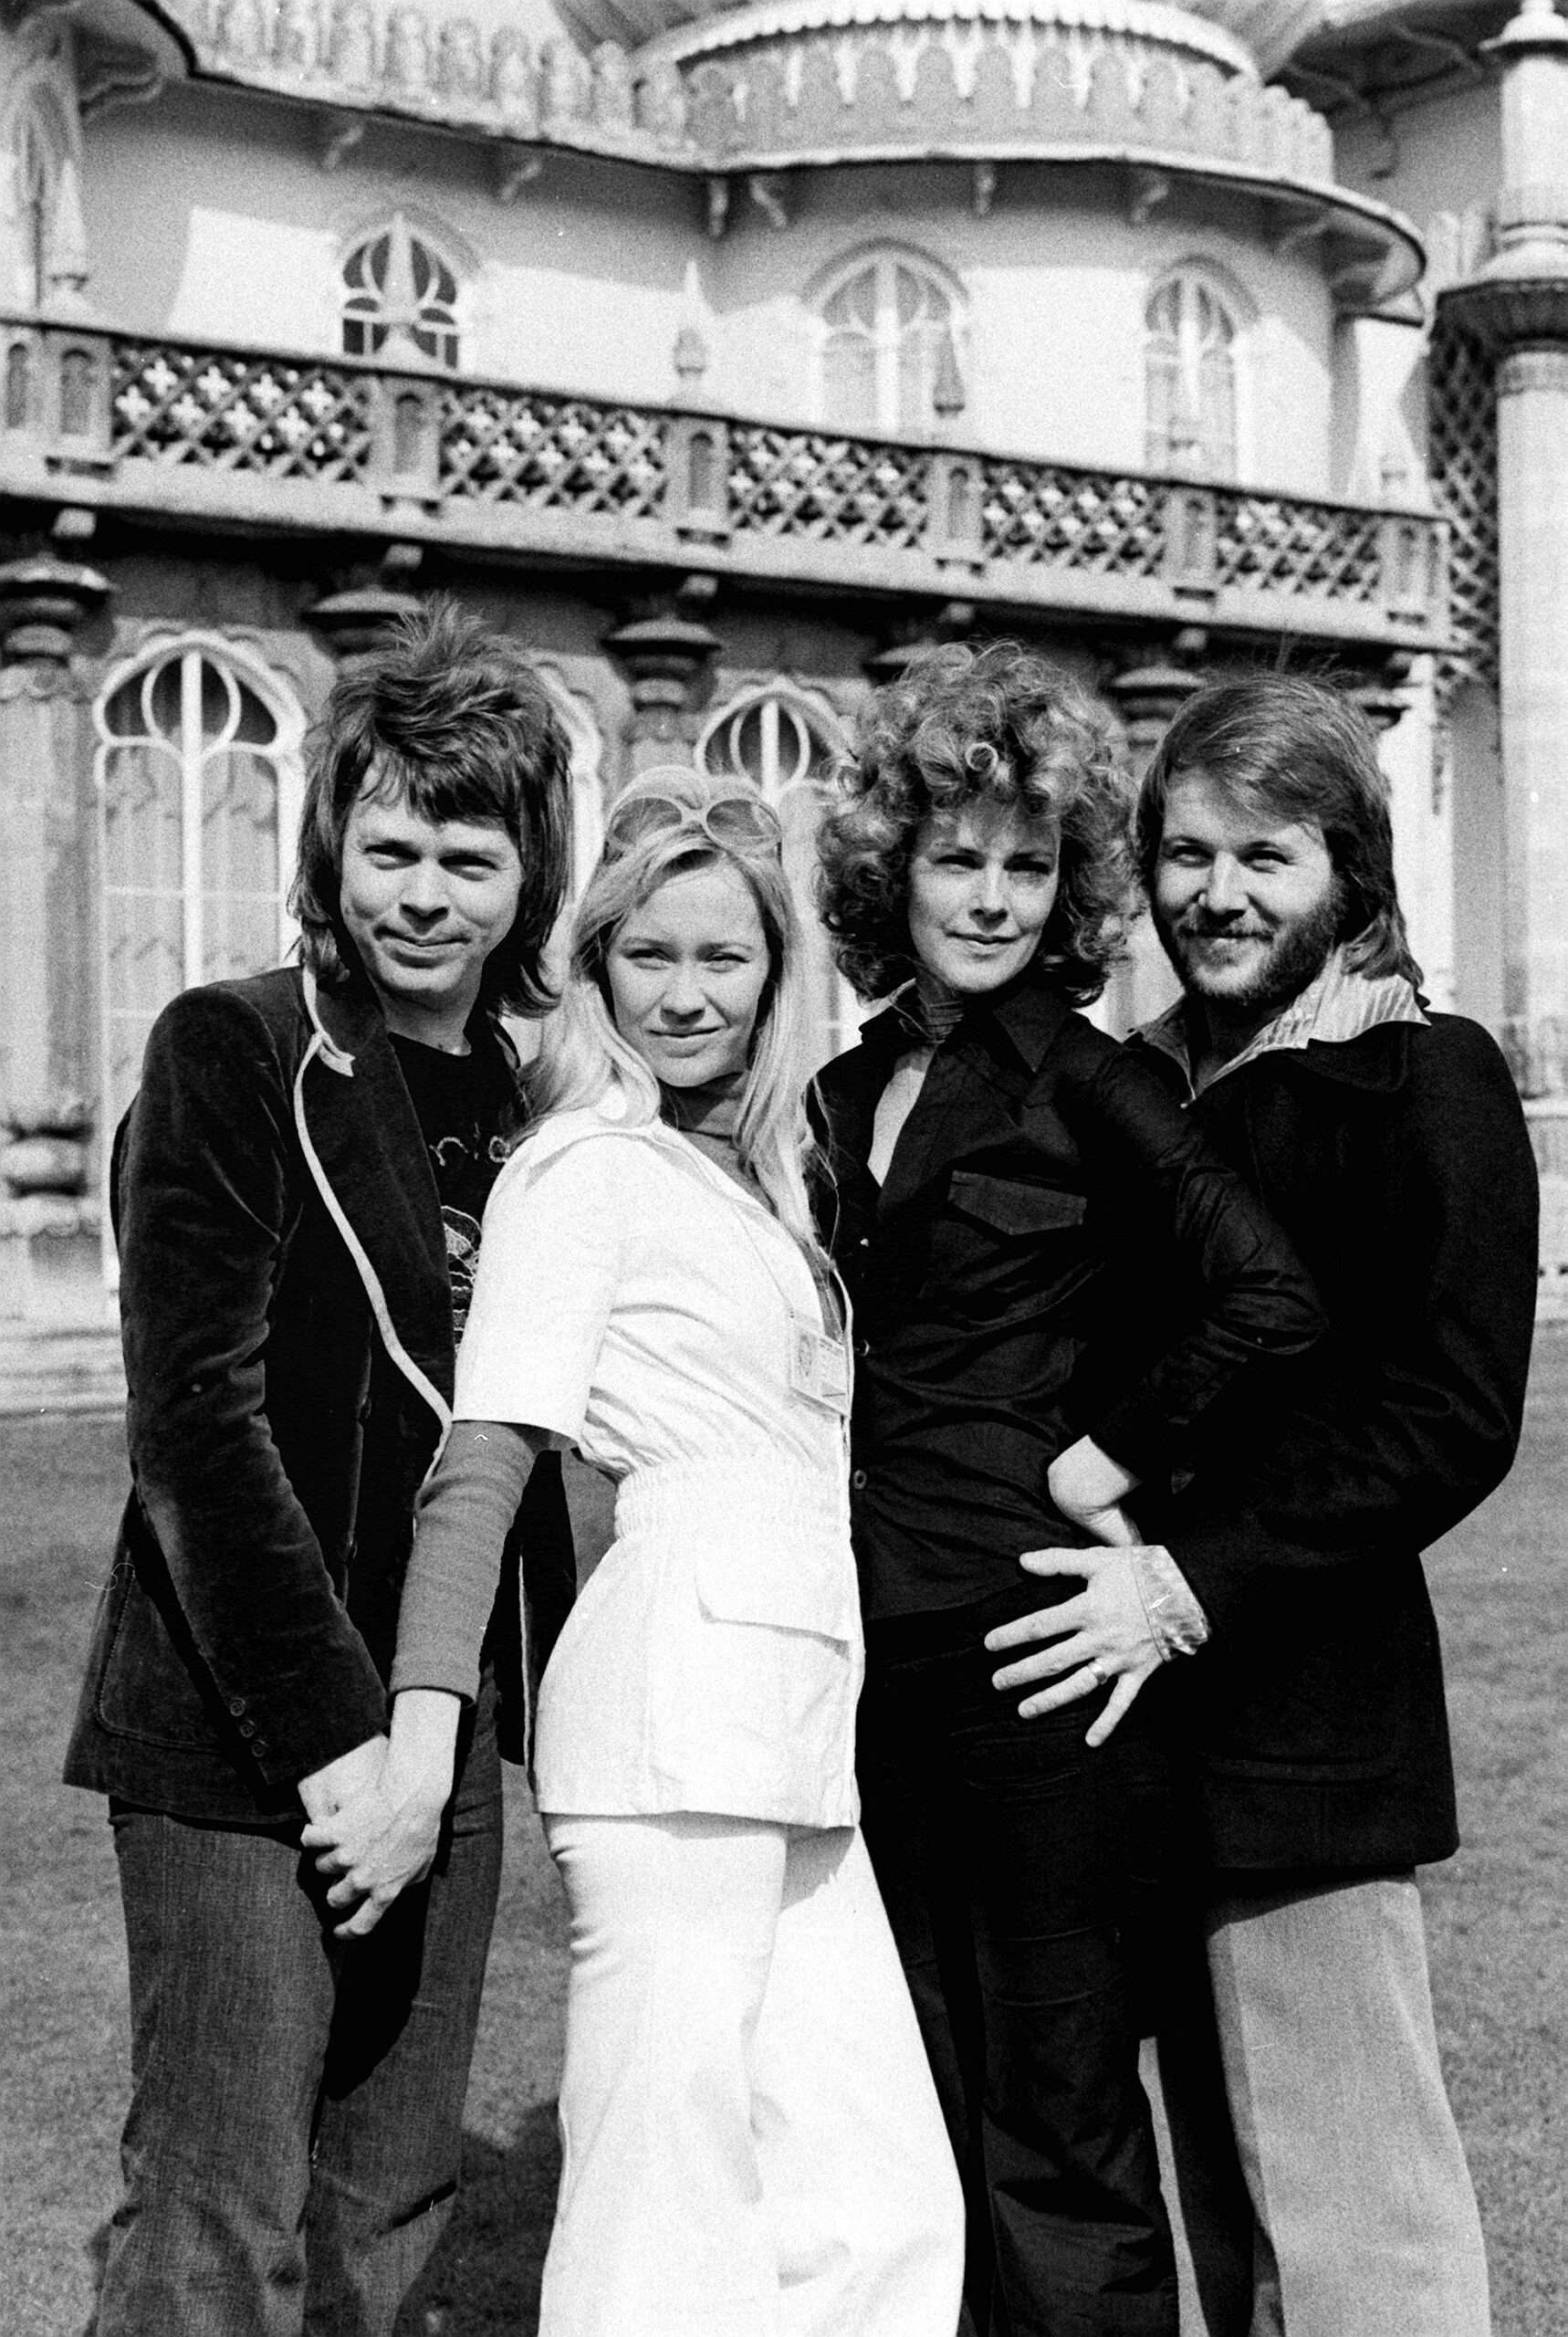 ABBA Swedish Pop Group Winners of the 1974 Eurovision Song Contest Universal Pictorial Press Photo PPH 272585 05.04.1974